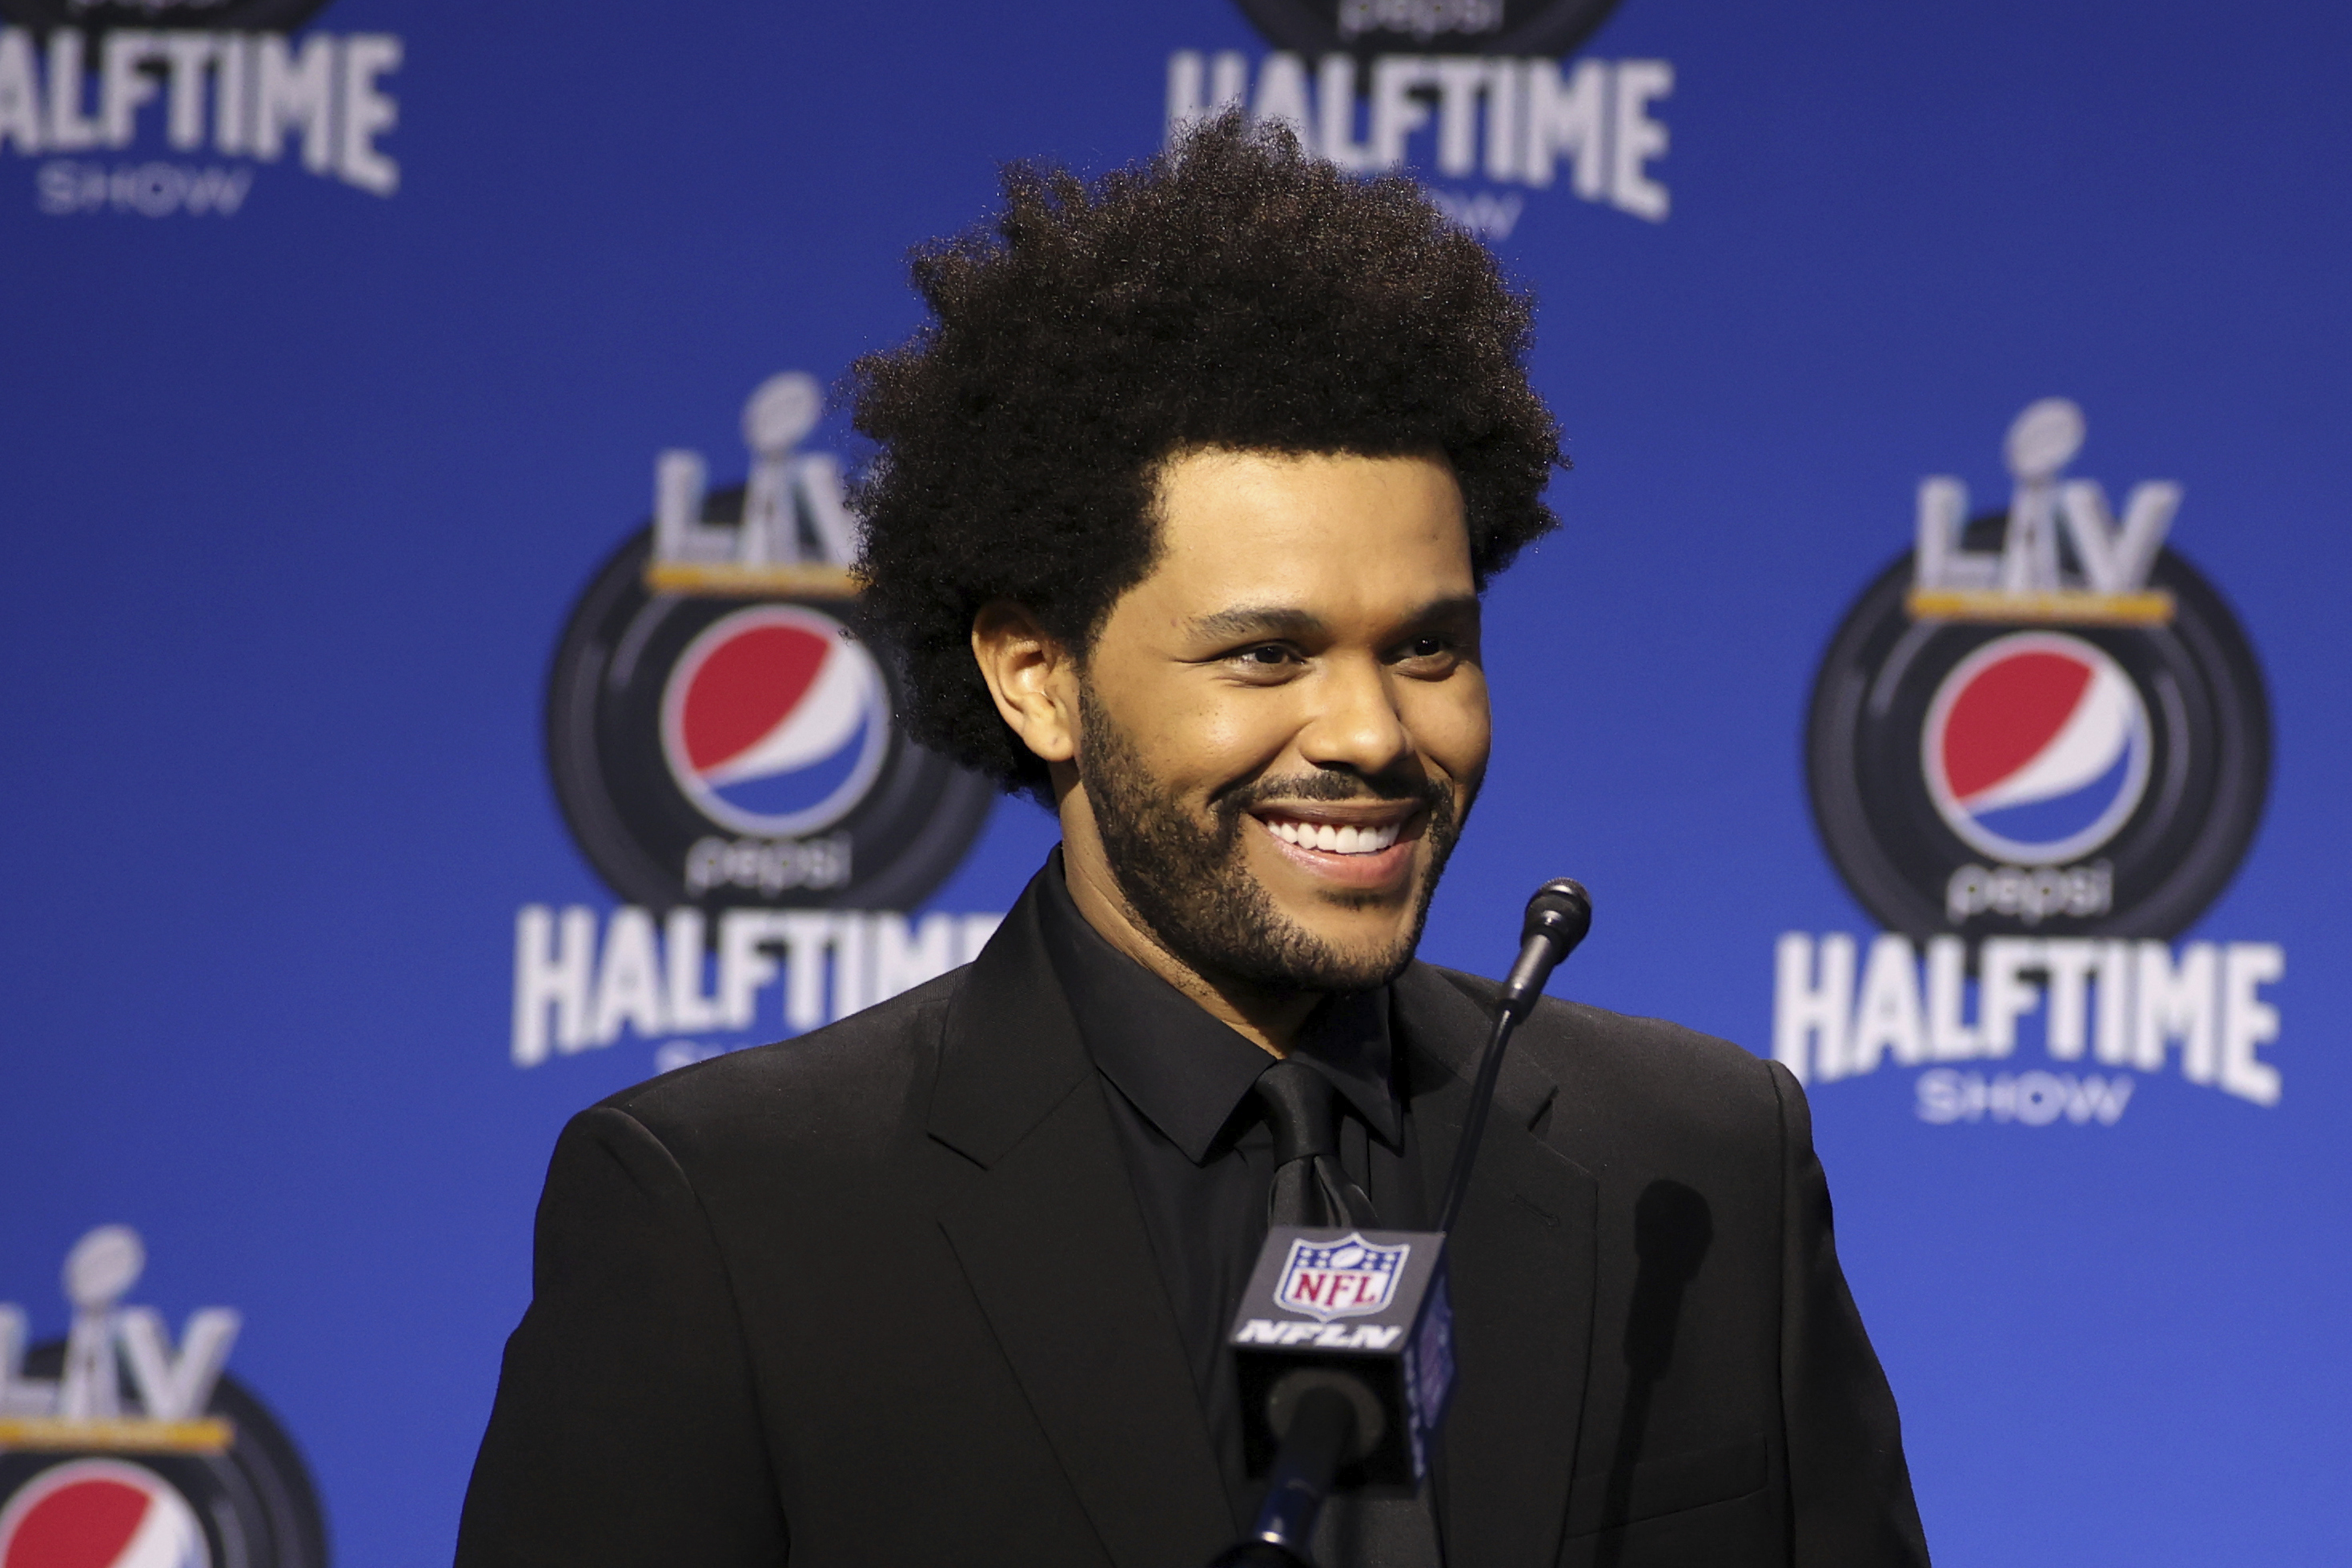 The Weeknd won the Super Bowl with hit-filled halftime show